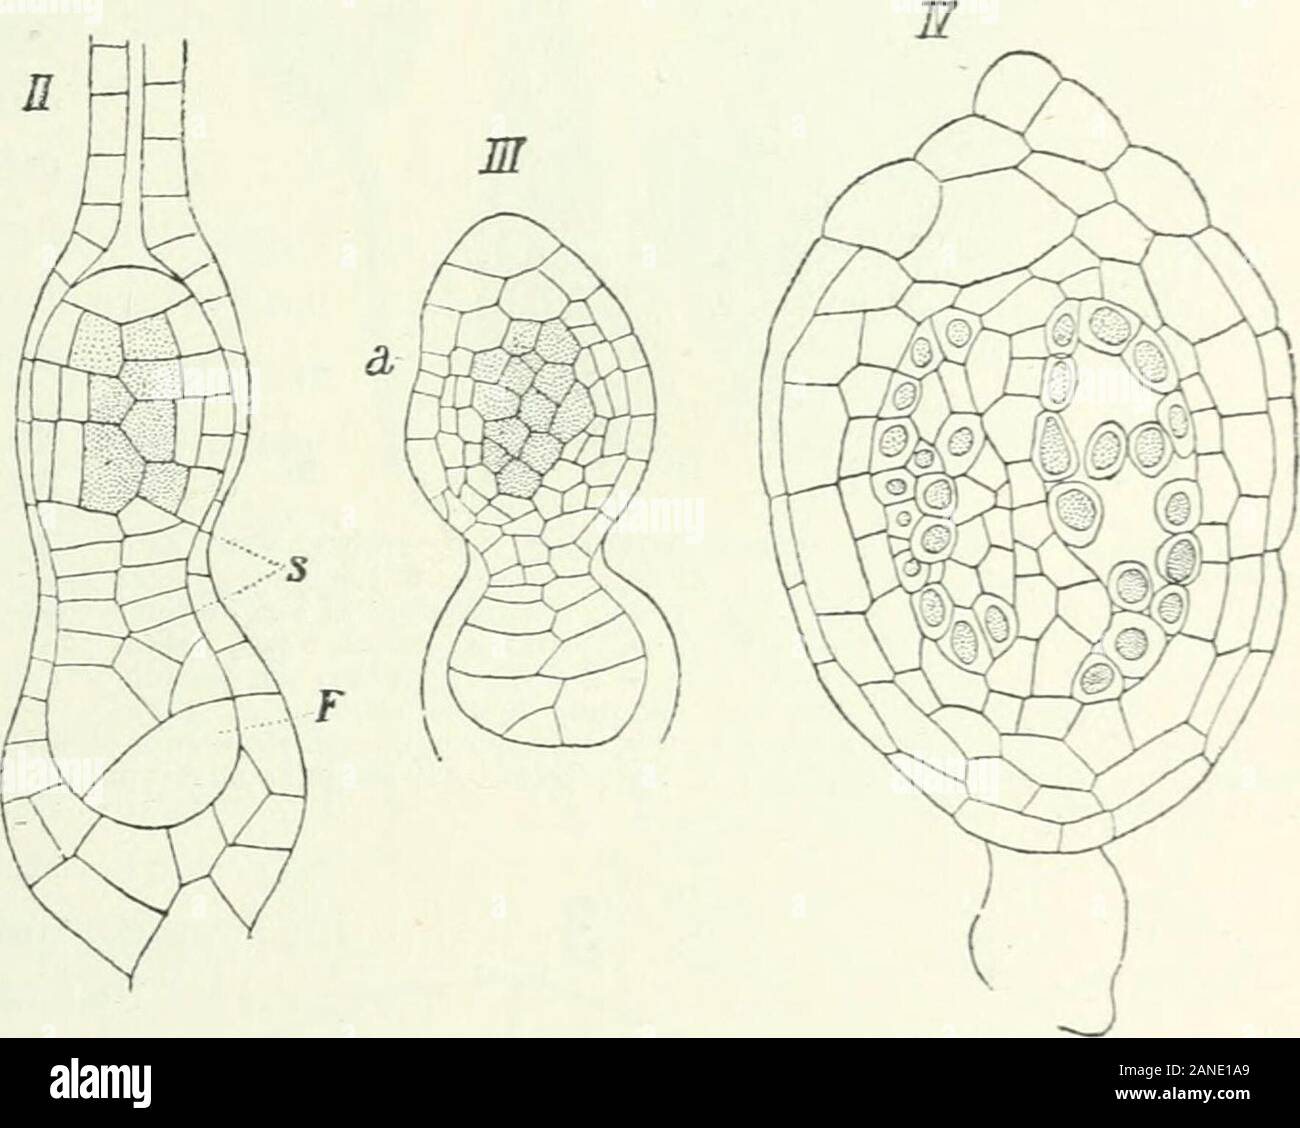 Organography of plants, especially of the archegoniatae and spermaphyta . Fig. I20. Nanomitriuin tenerum. Archegonium after fertilization and 3oung sporogonium at different stagesof development in longitudinal section. /, young embrjo slill within the archegonial venter. //, older embrj-o;the endotliecium is shaded ; the foot, F^ has bored into the stalk of the archegonium : .S, stalk of the sporogonium.///, still older embrjo ; a, amphithecium divided by periclinal walls. IV, sporogonium showing the sporocytes ingreat part separate around the columella. In most of the sporocytes the contents Stock Photo